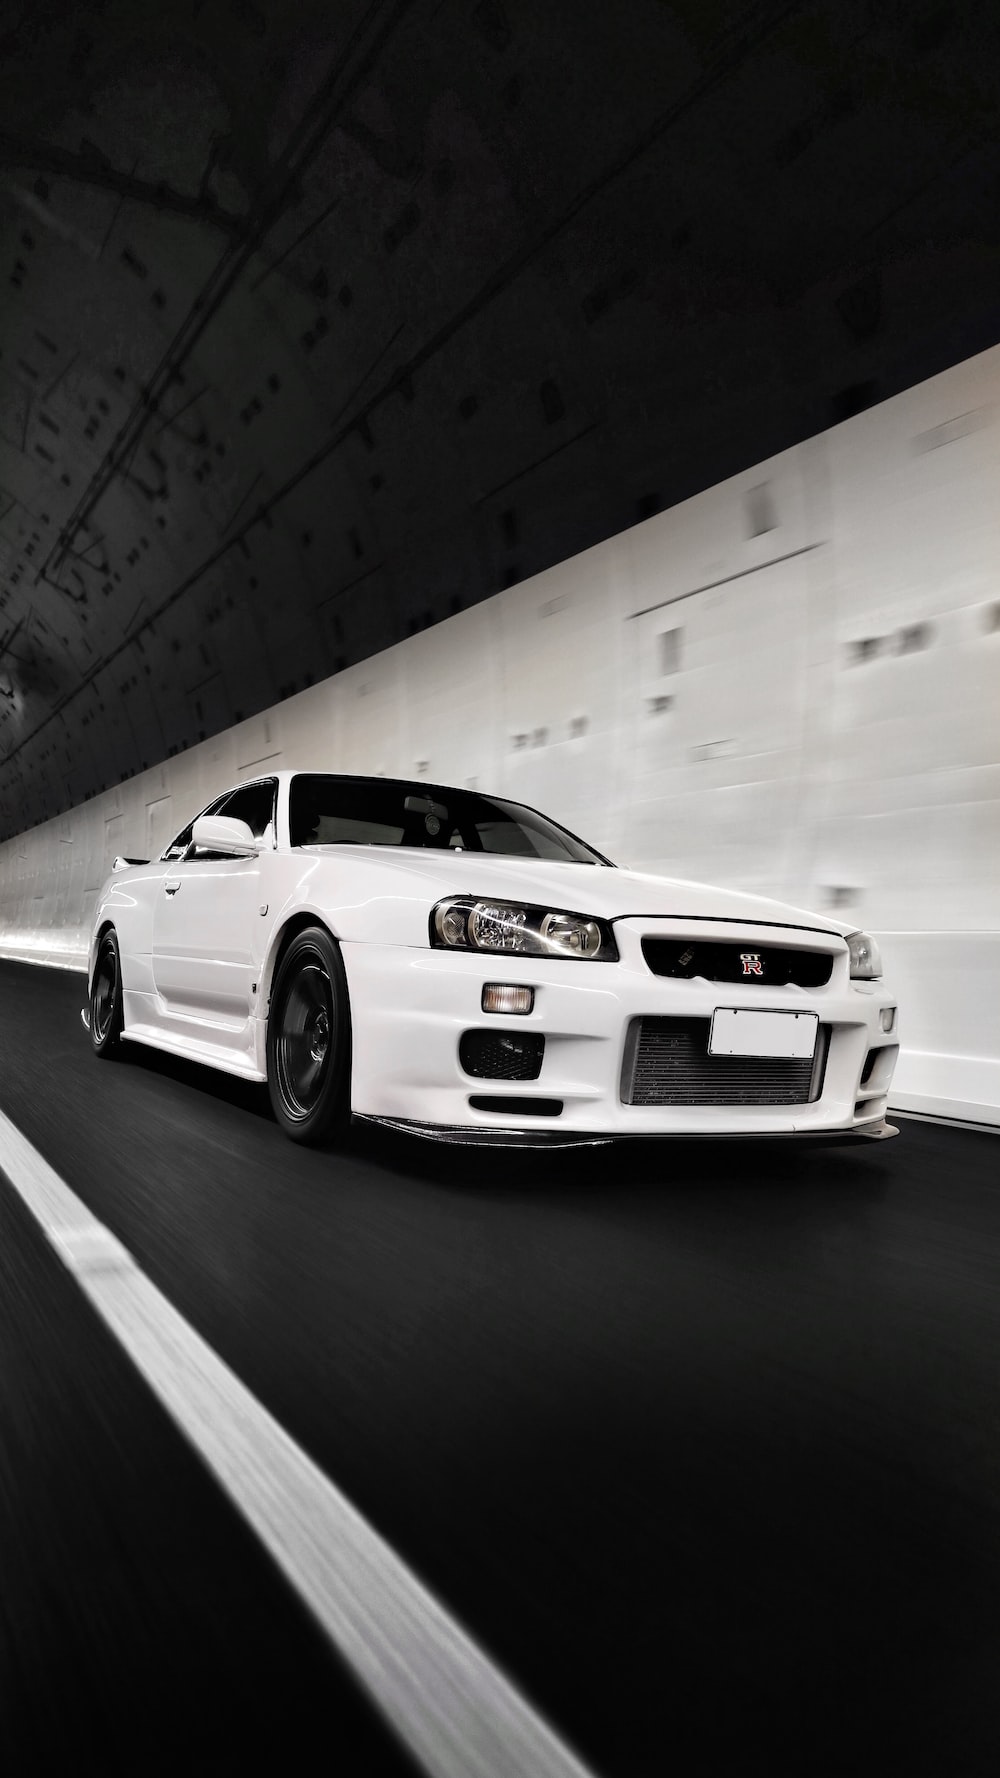 Nissan Gtr R34 Picture. Download Free